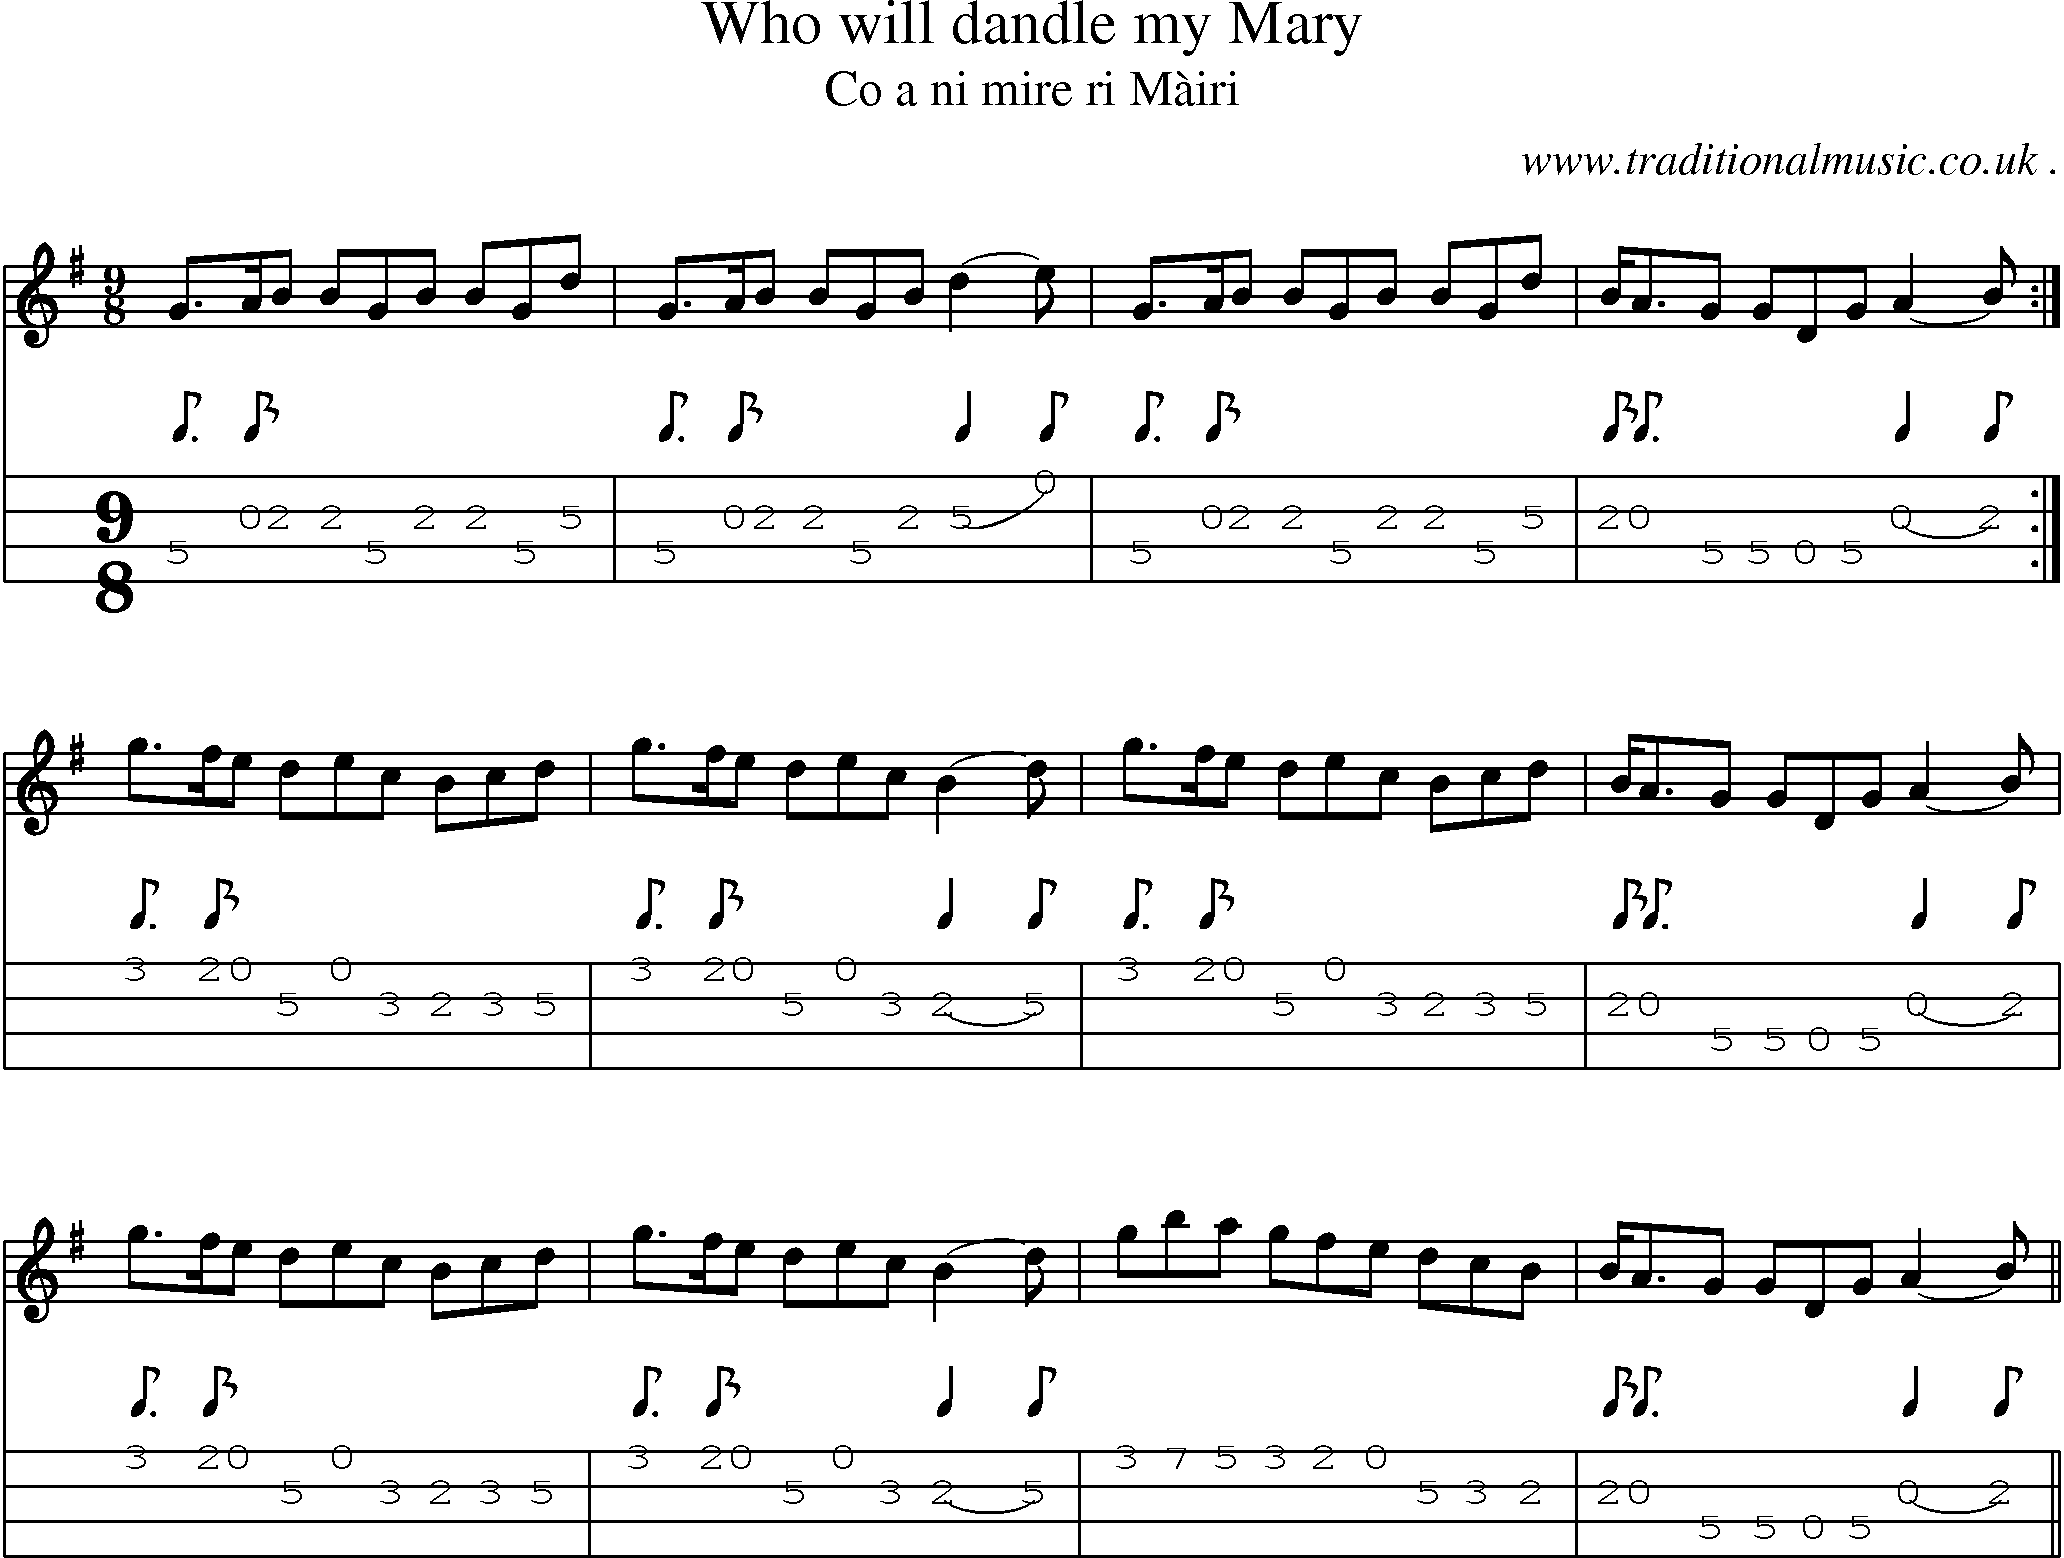 Sheet-music  score, Chords and Mandolin Tabs for Who Will Dandle My Mary